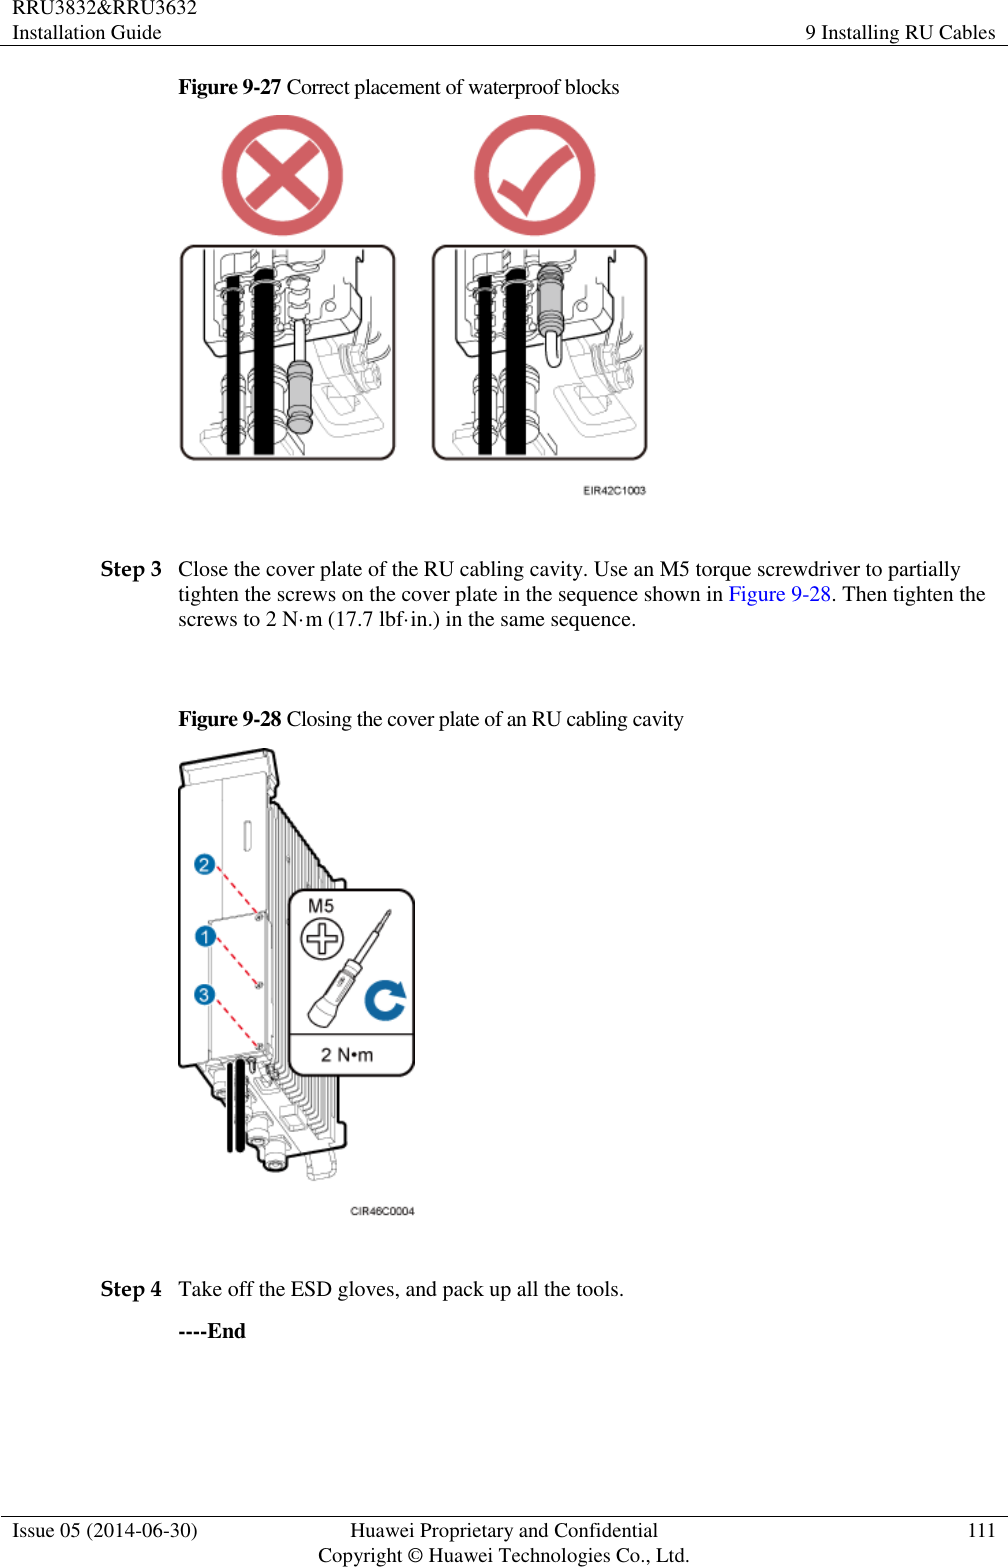 RRU3832&amp;RRU3632 Installation Guide 9 Installing RU Cables  Issue 05 (2014-06-30) Huawei Proprietary and Confidential                                     Copyright © Huawei Technologies Co., Ltd. 111  Figure 9-27 Correct placement of waterproof blocks   Step 3 Close the cover plate of the RU cabling cavity. Use an M5 torque screwdriver to partially tighten the screws on the cover plate in the sequence shown in Figure 9-28. Then tighten the screws to 2 N·m (17.7 lbf·in.) in the same sequence.  Figure 9-28 Closing the cover plate of an RU cabling cavity   Step 4 Take off the ESD gloves, and pack up all the tools. ----End 